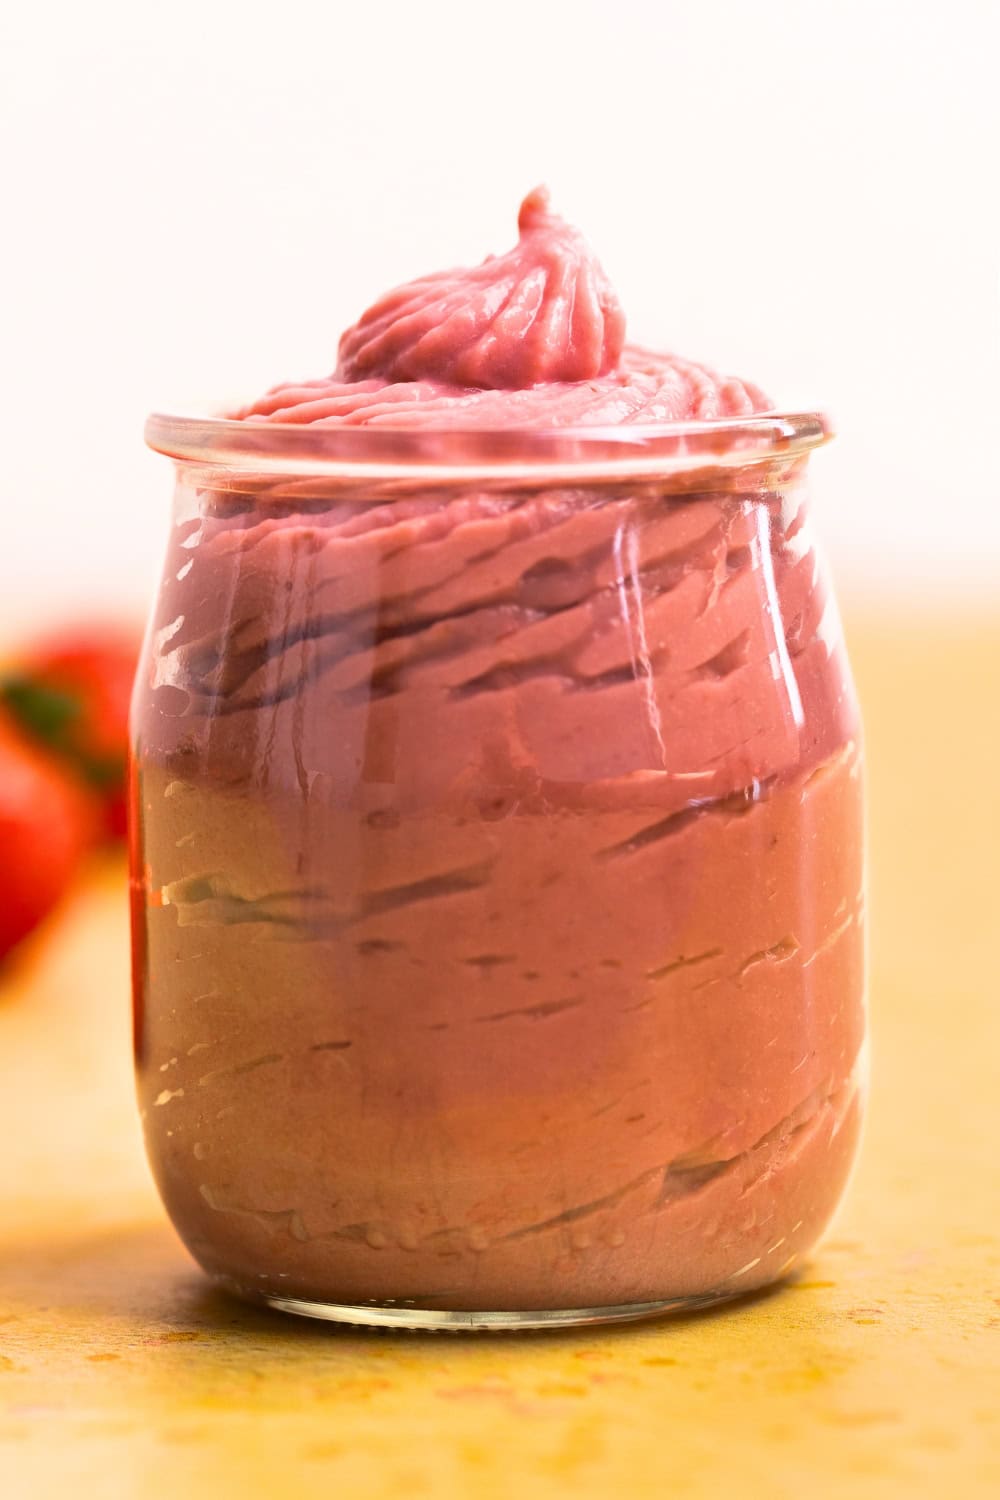 Strawberry pastry cream in a jar